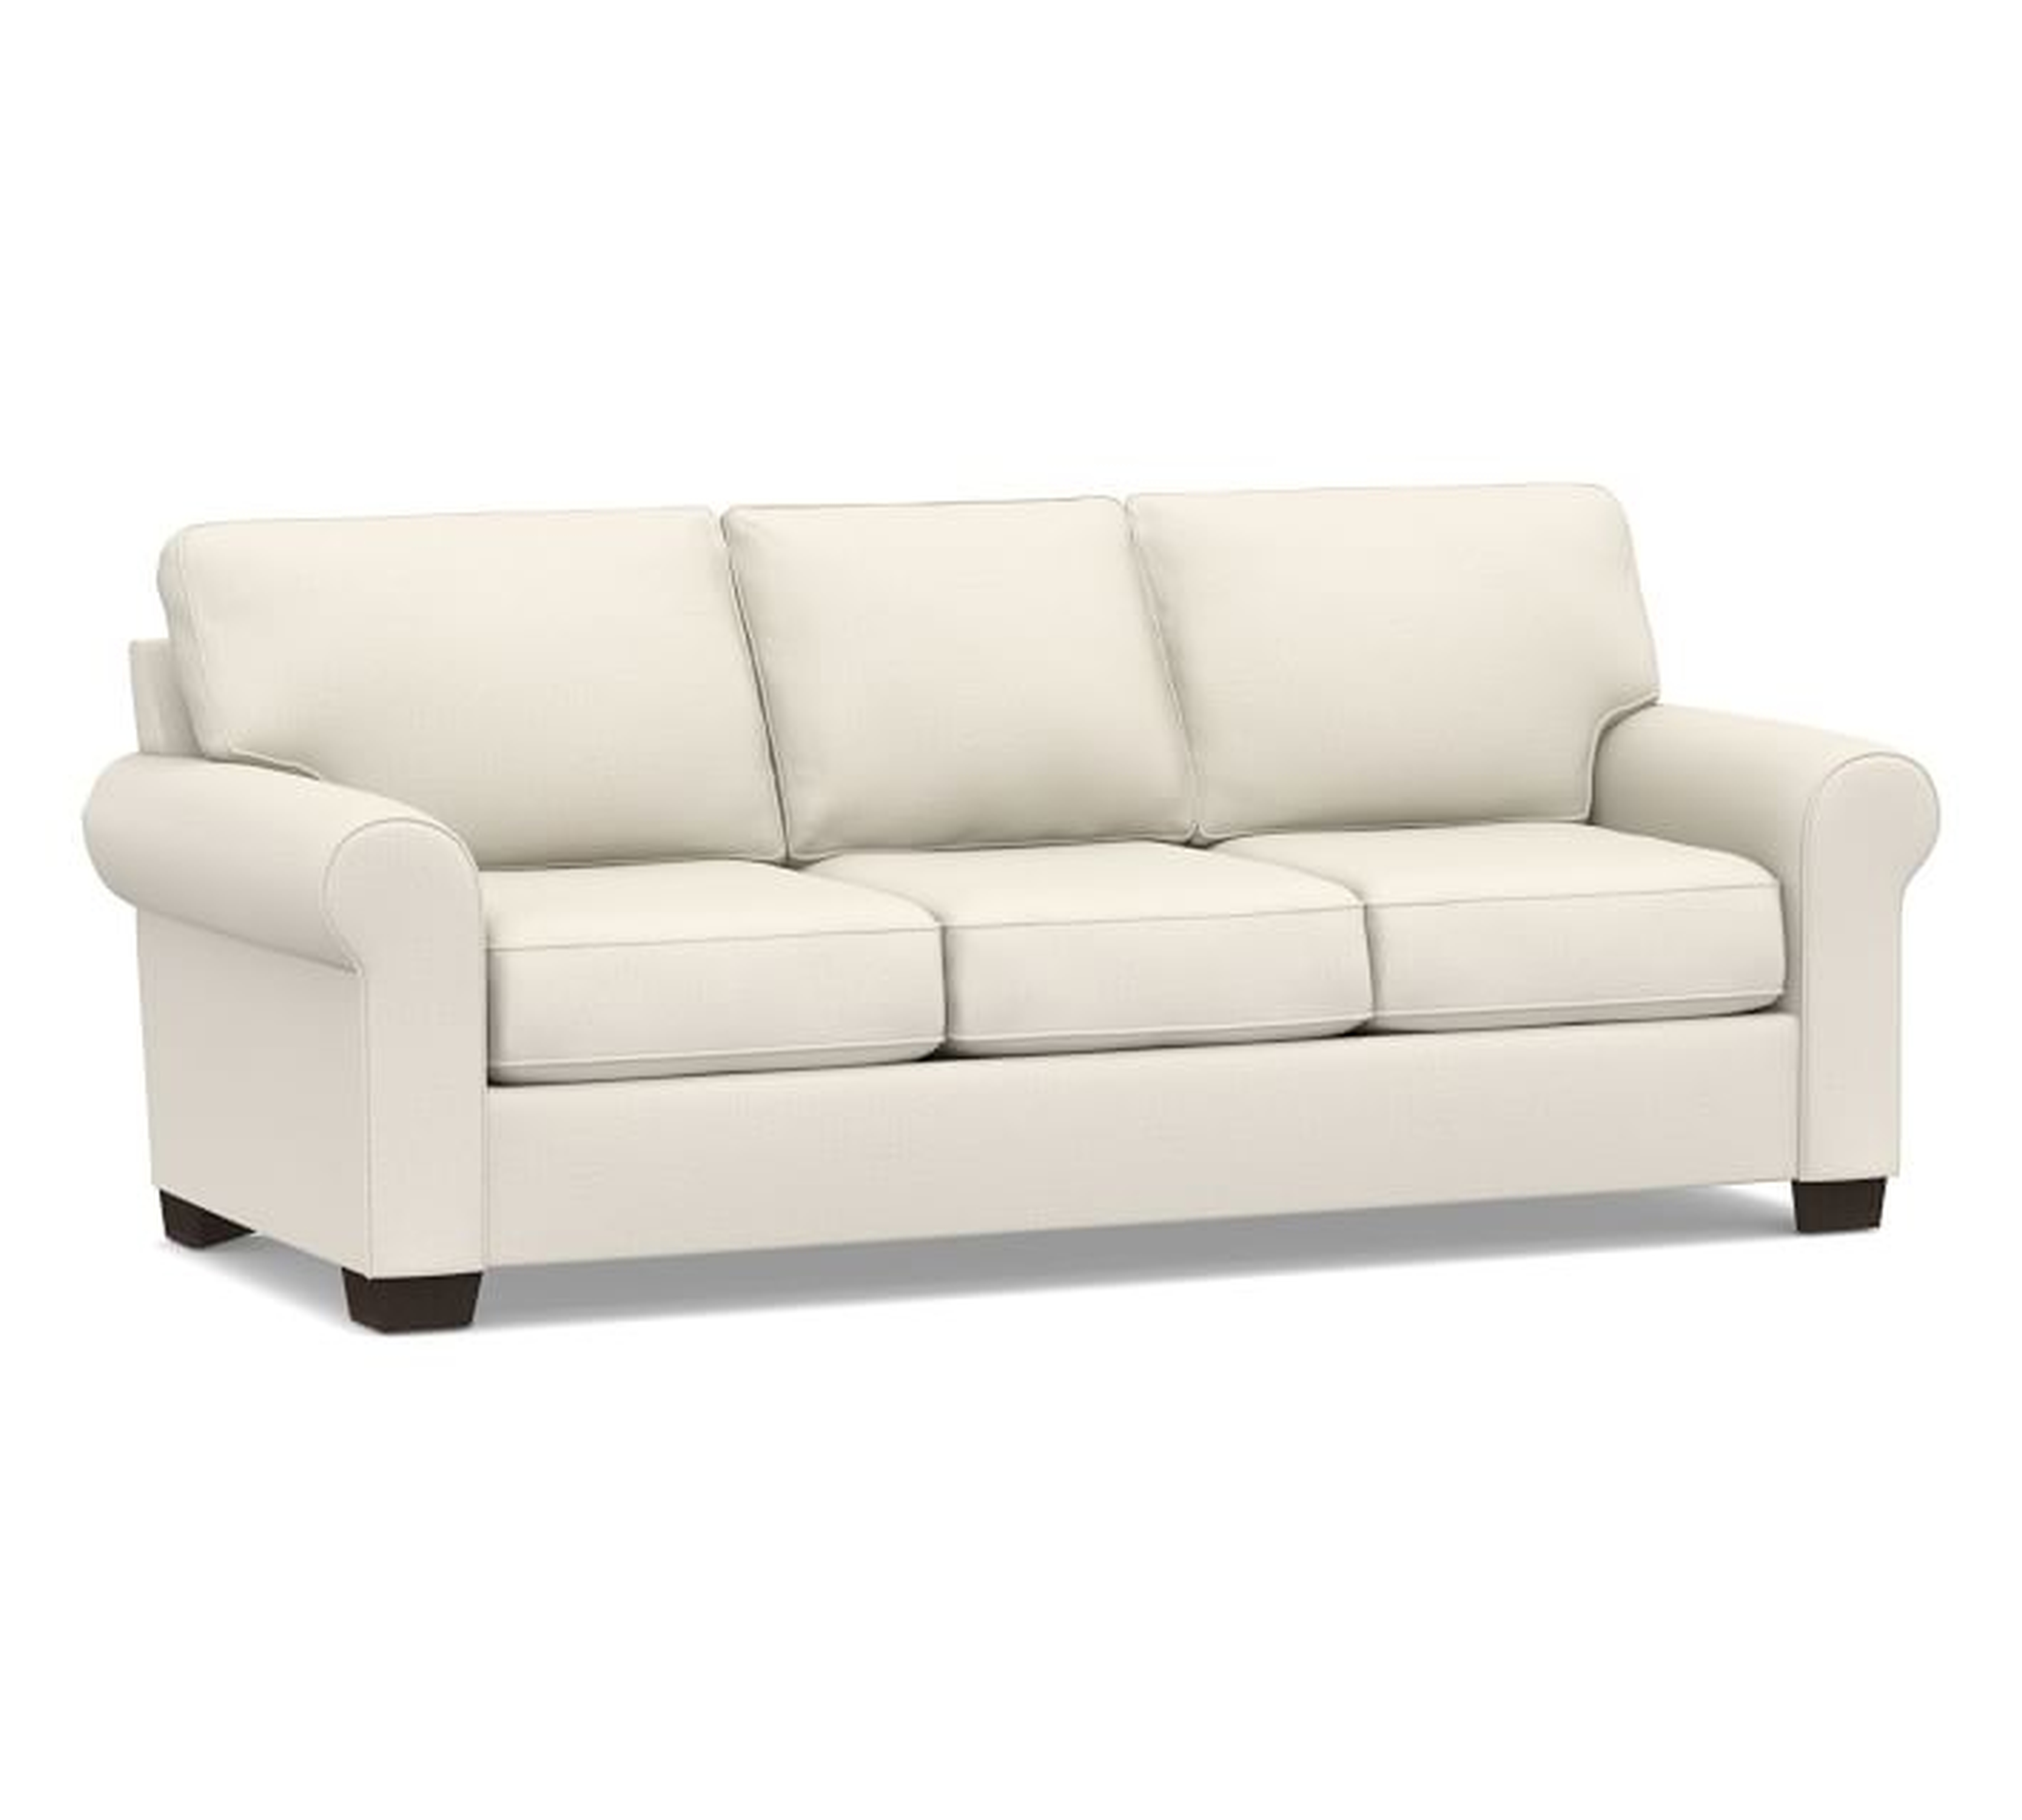 Buchanan Roll Arm Upholstered Grand Sofa 93.5", Polyester Wrapped Cushions, Performance Boucle Oatmeal - Pottery Barn